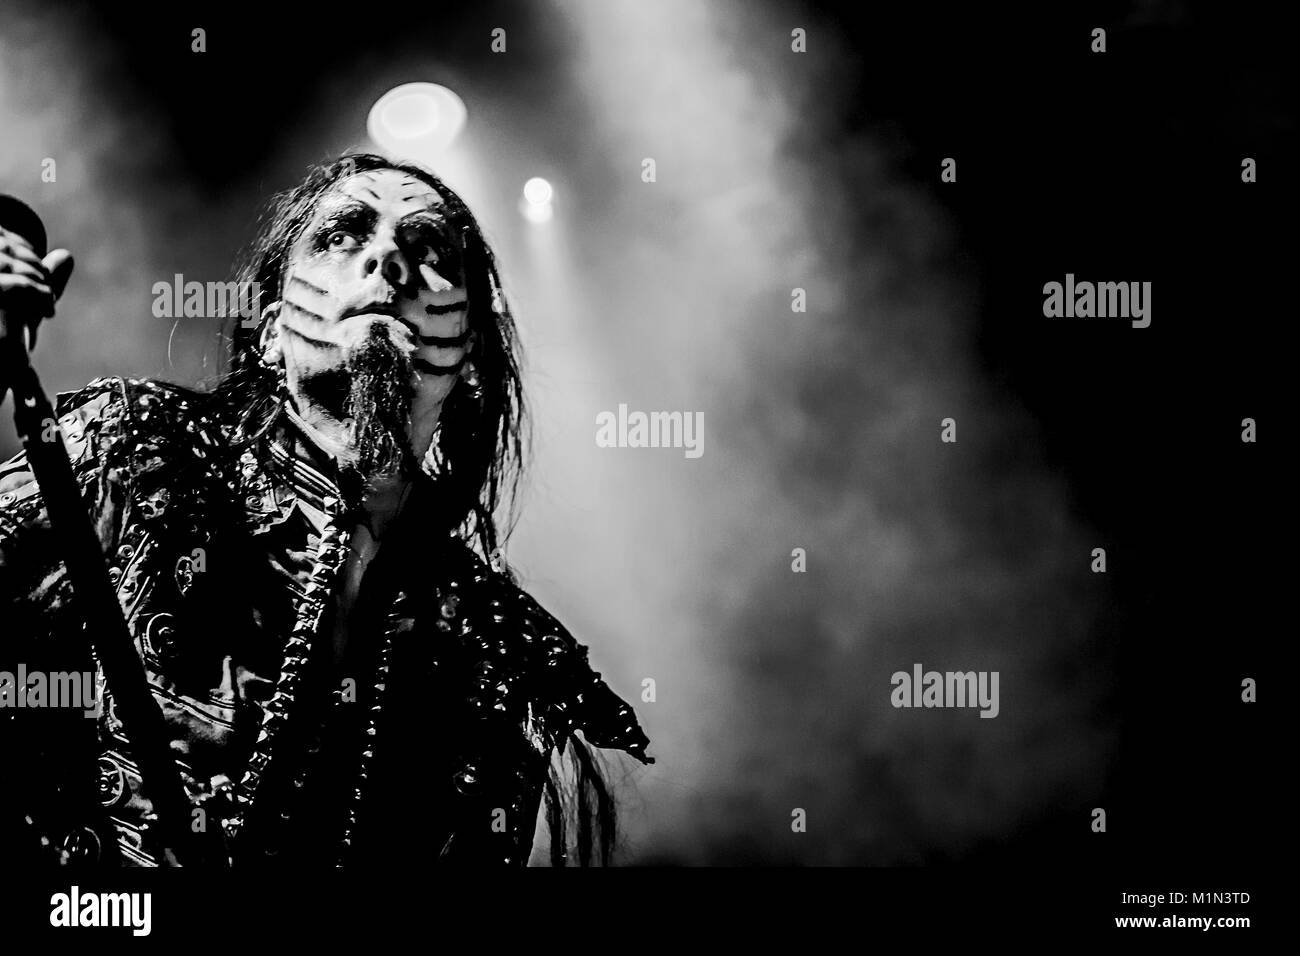 The Norwegian symphonic black metal band Dimmu Borgir performs live at Ole Bull Scene in Bergen. Here vocalist Shagrath is seen live on stage. Norway, 28/05 2012. Stock Photo